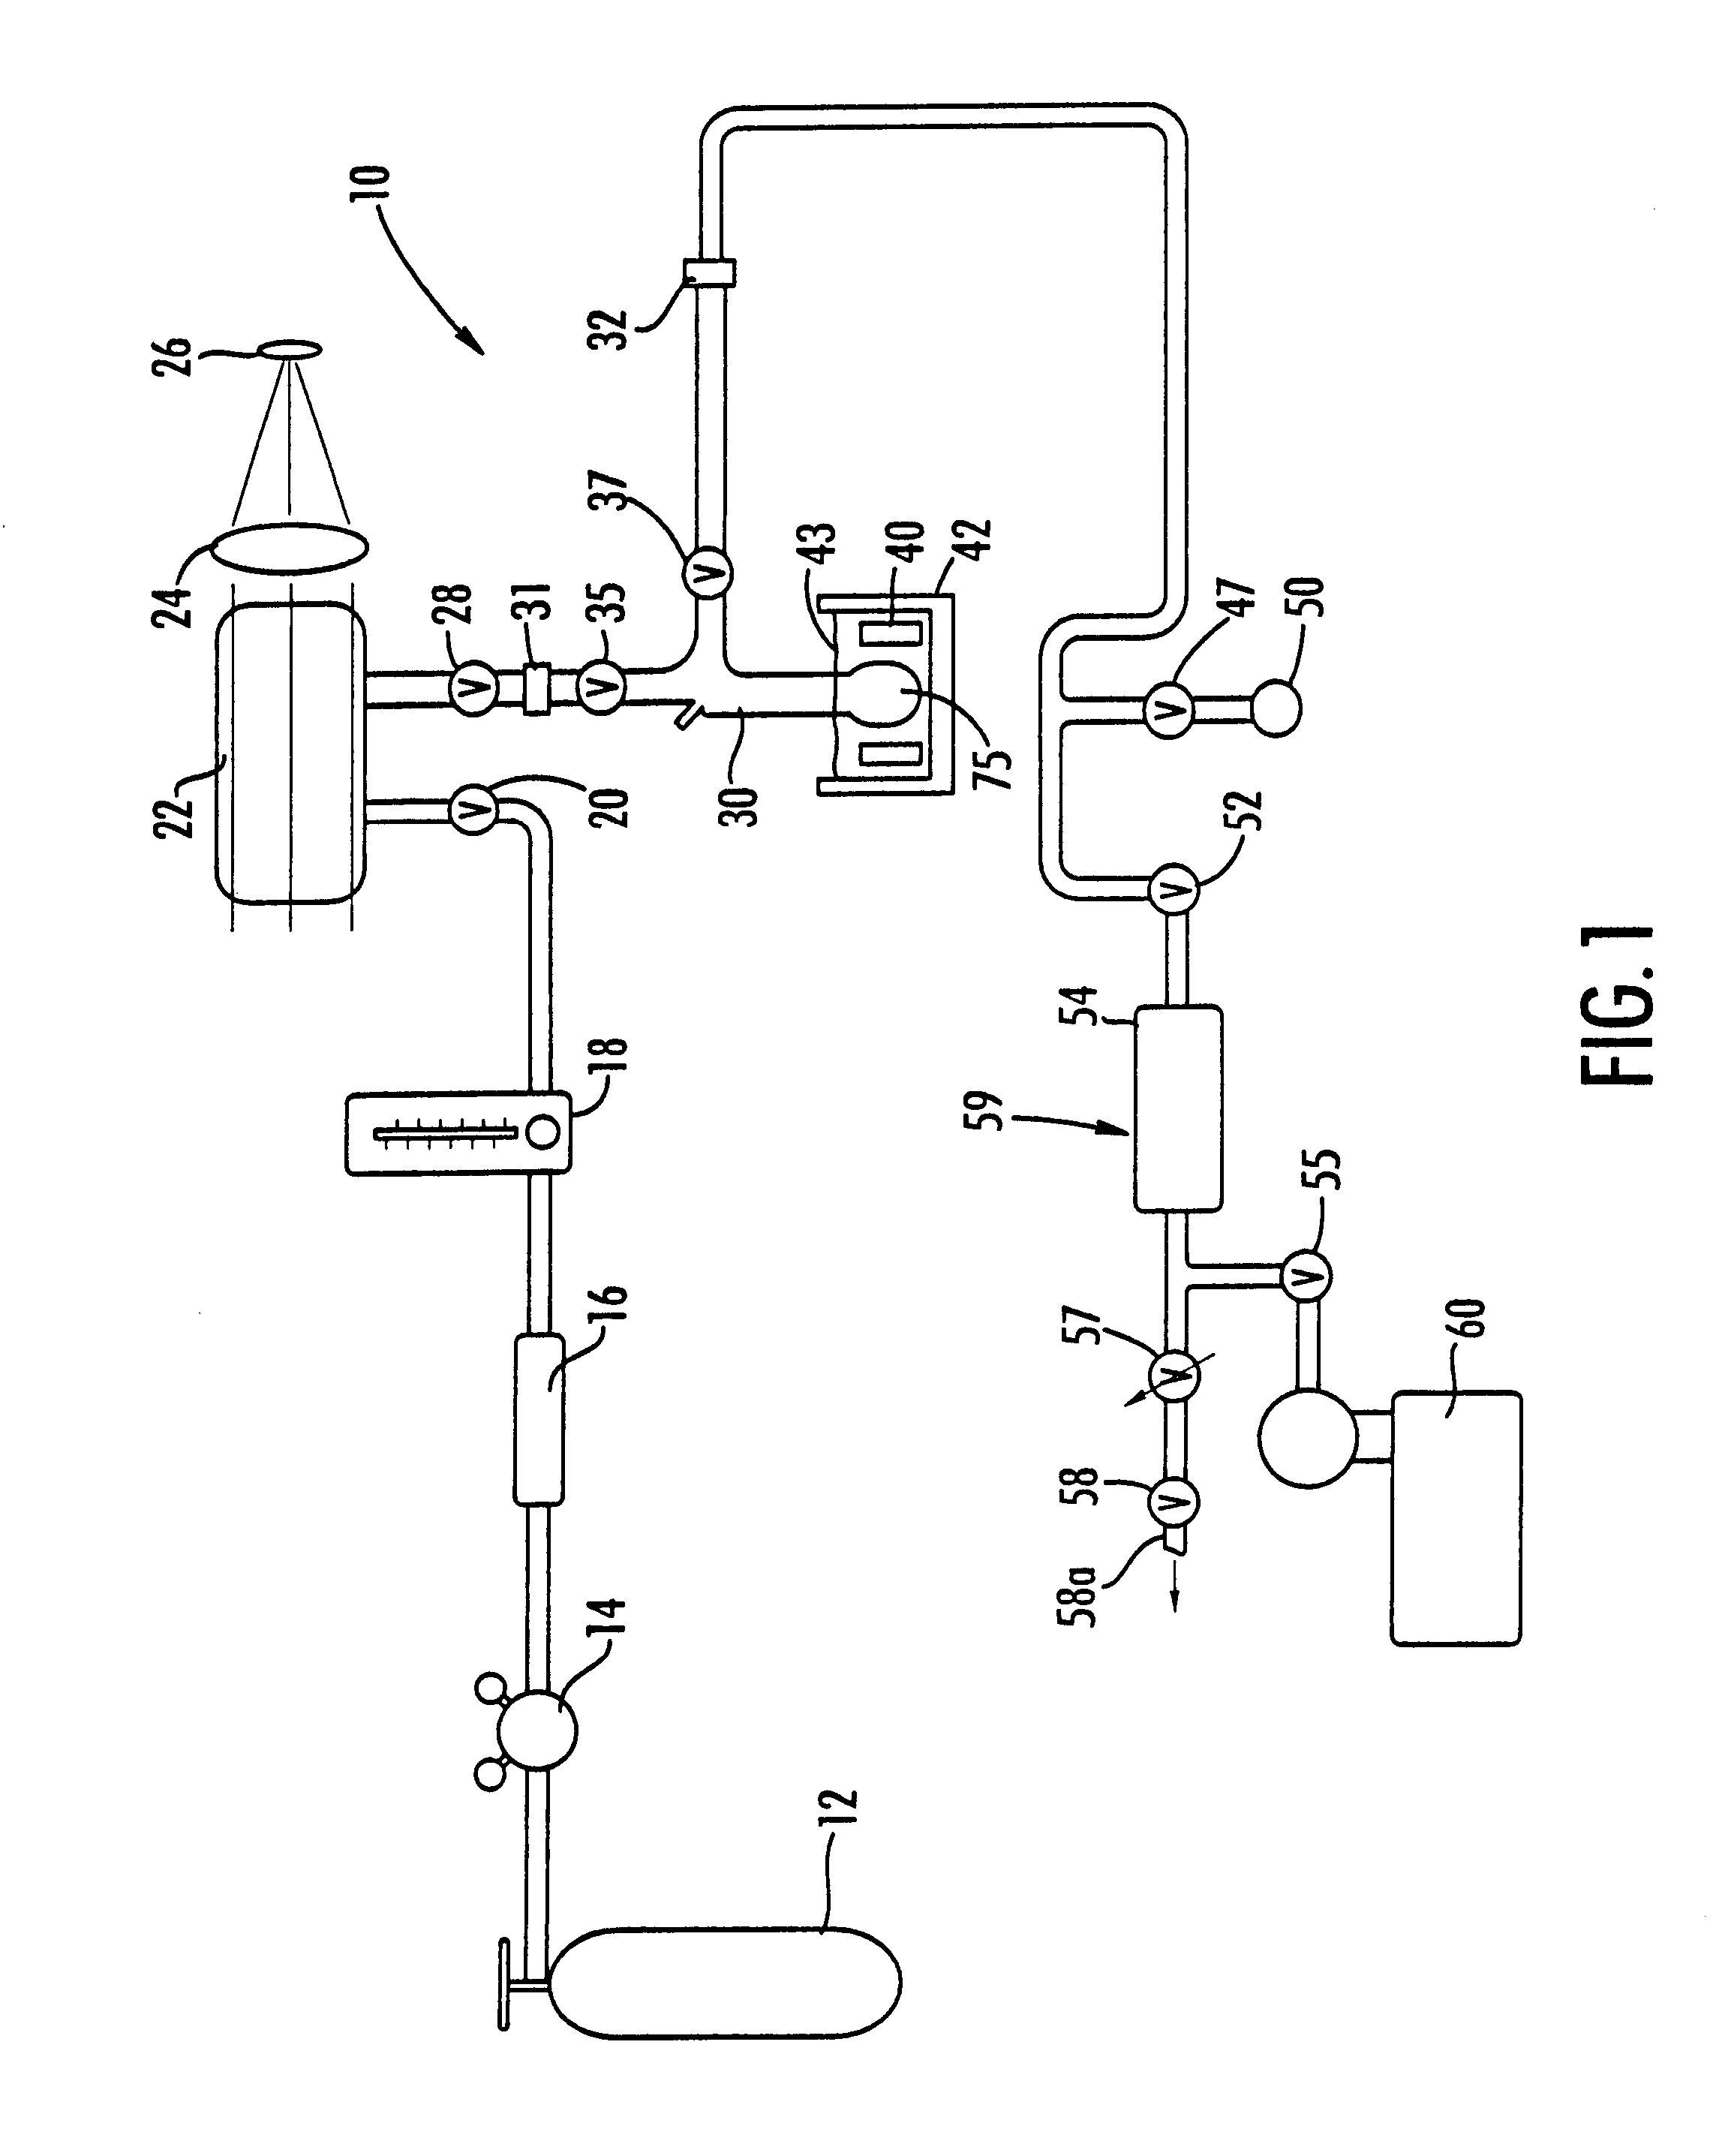 Polarized gas accumulators and heating jackets and associated gas collection methods and thaw methods and polarized gas products